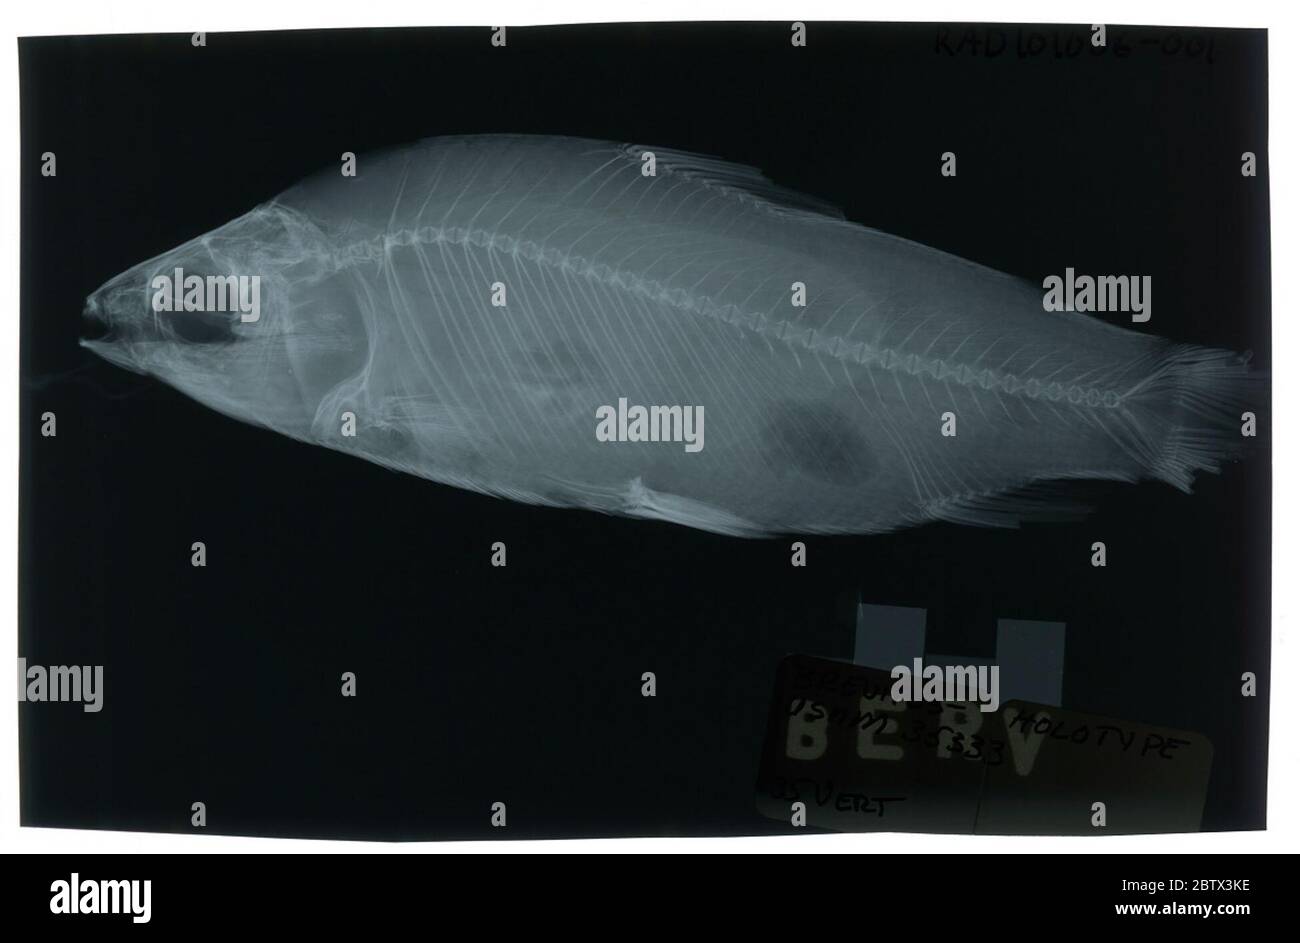 Curimatus brevipes. Radiograph is of a type; The Smithsonian NMNH Division of Fishes uses the convention of maintaining the original species name for type specimens designated at the time of description. The currently accepted name for this species is Curimata brevipes.1 Aug 20191 Stock Photo